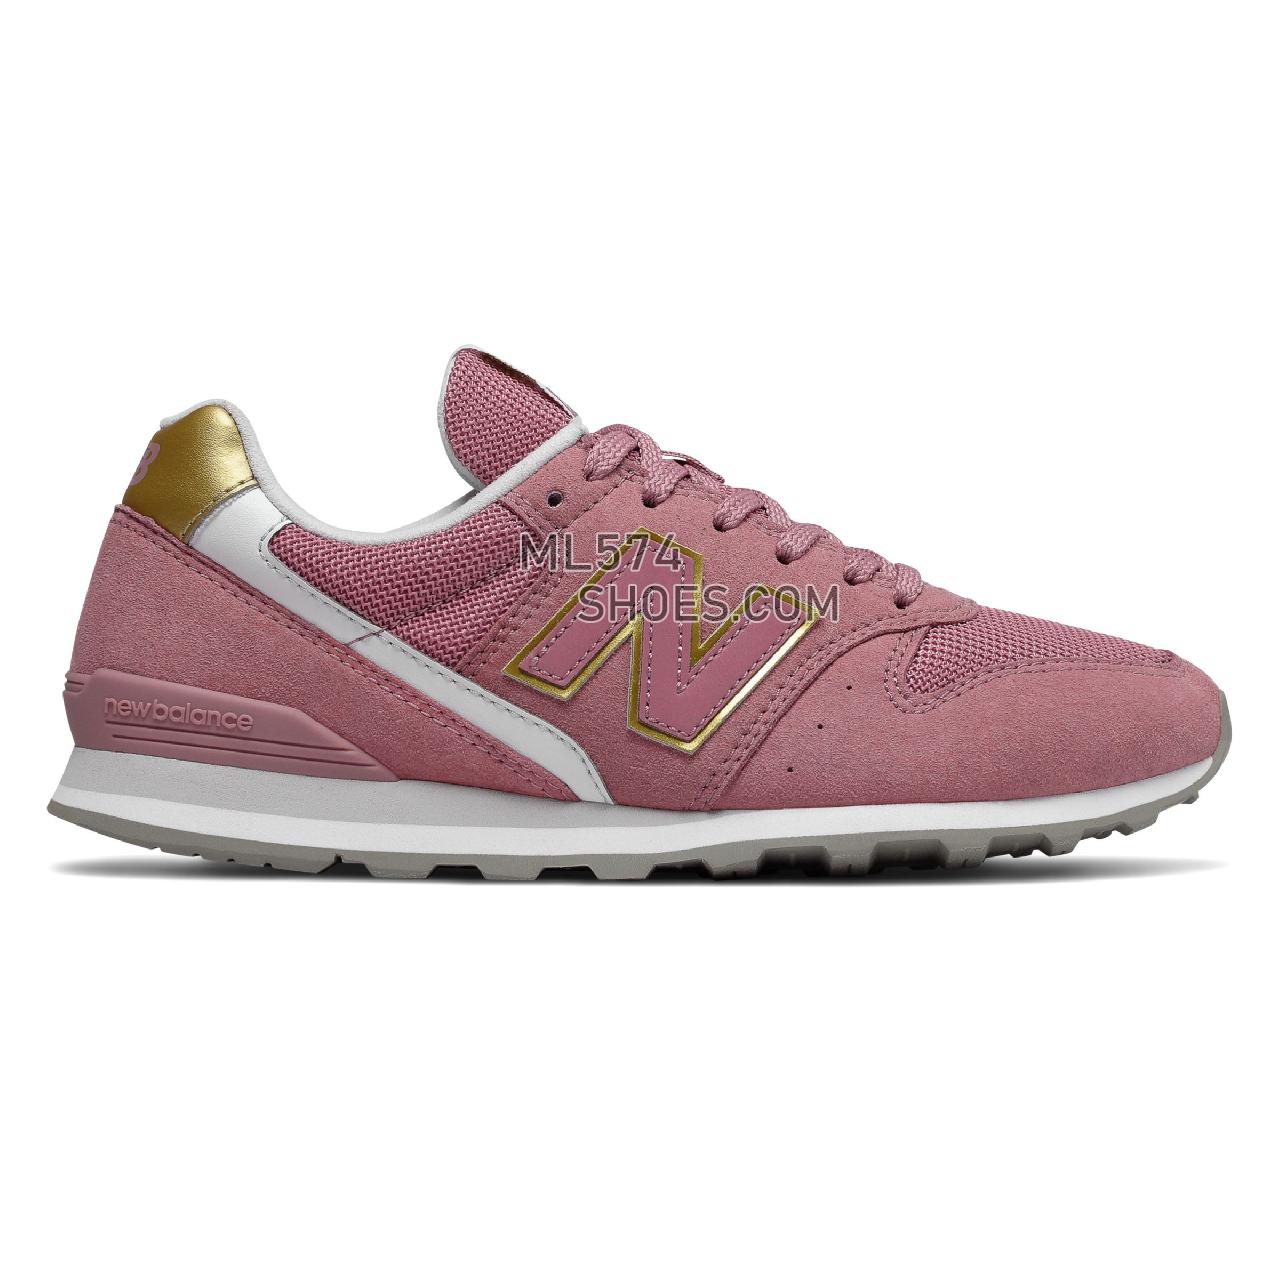 New Balance 996 - Women's Classic Sneakers - Pink with Classic Gold - WL996CP